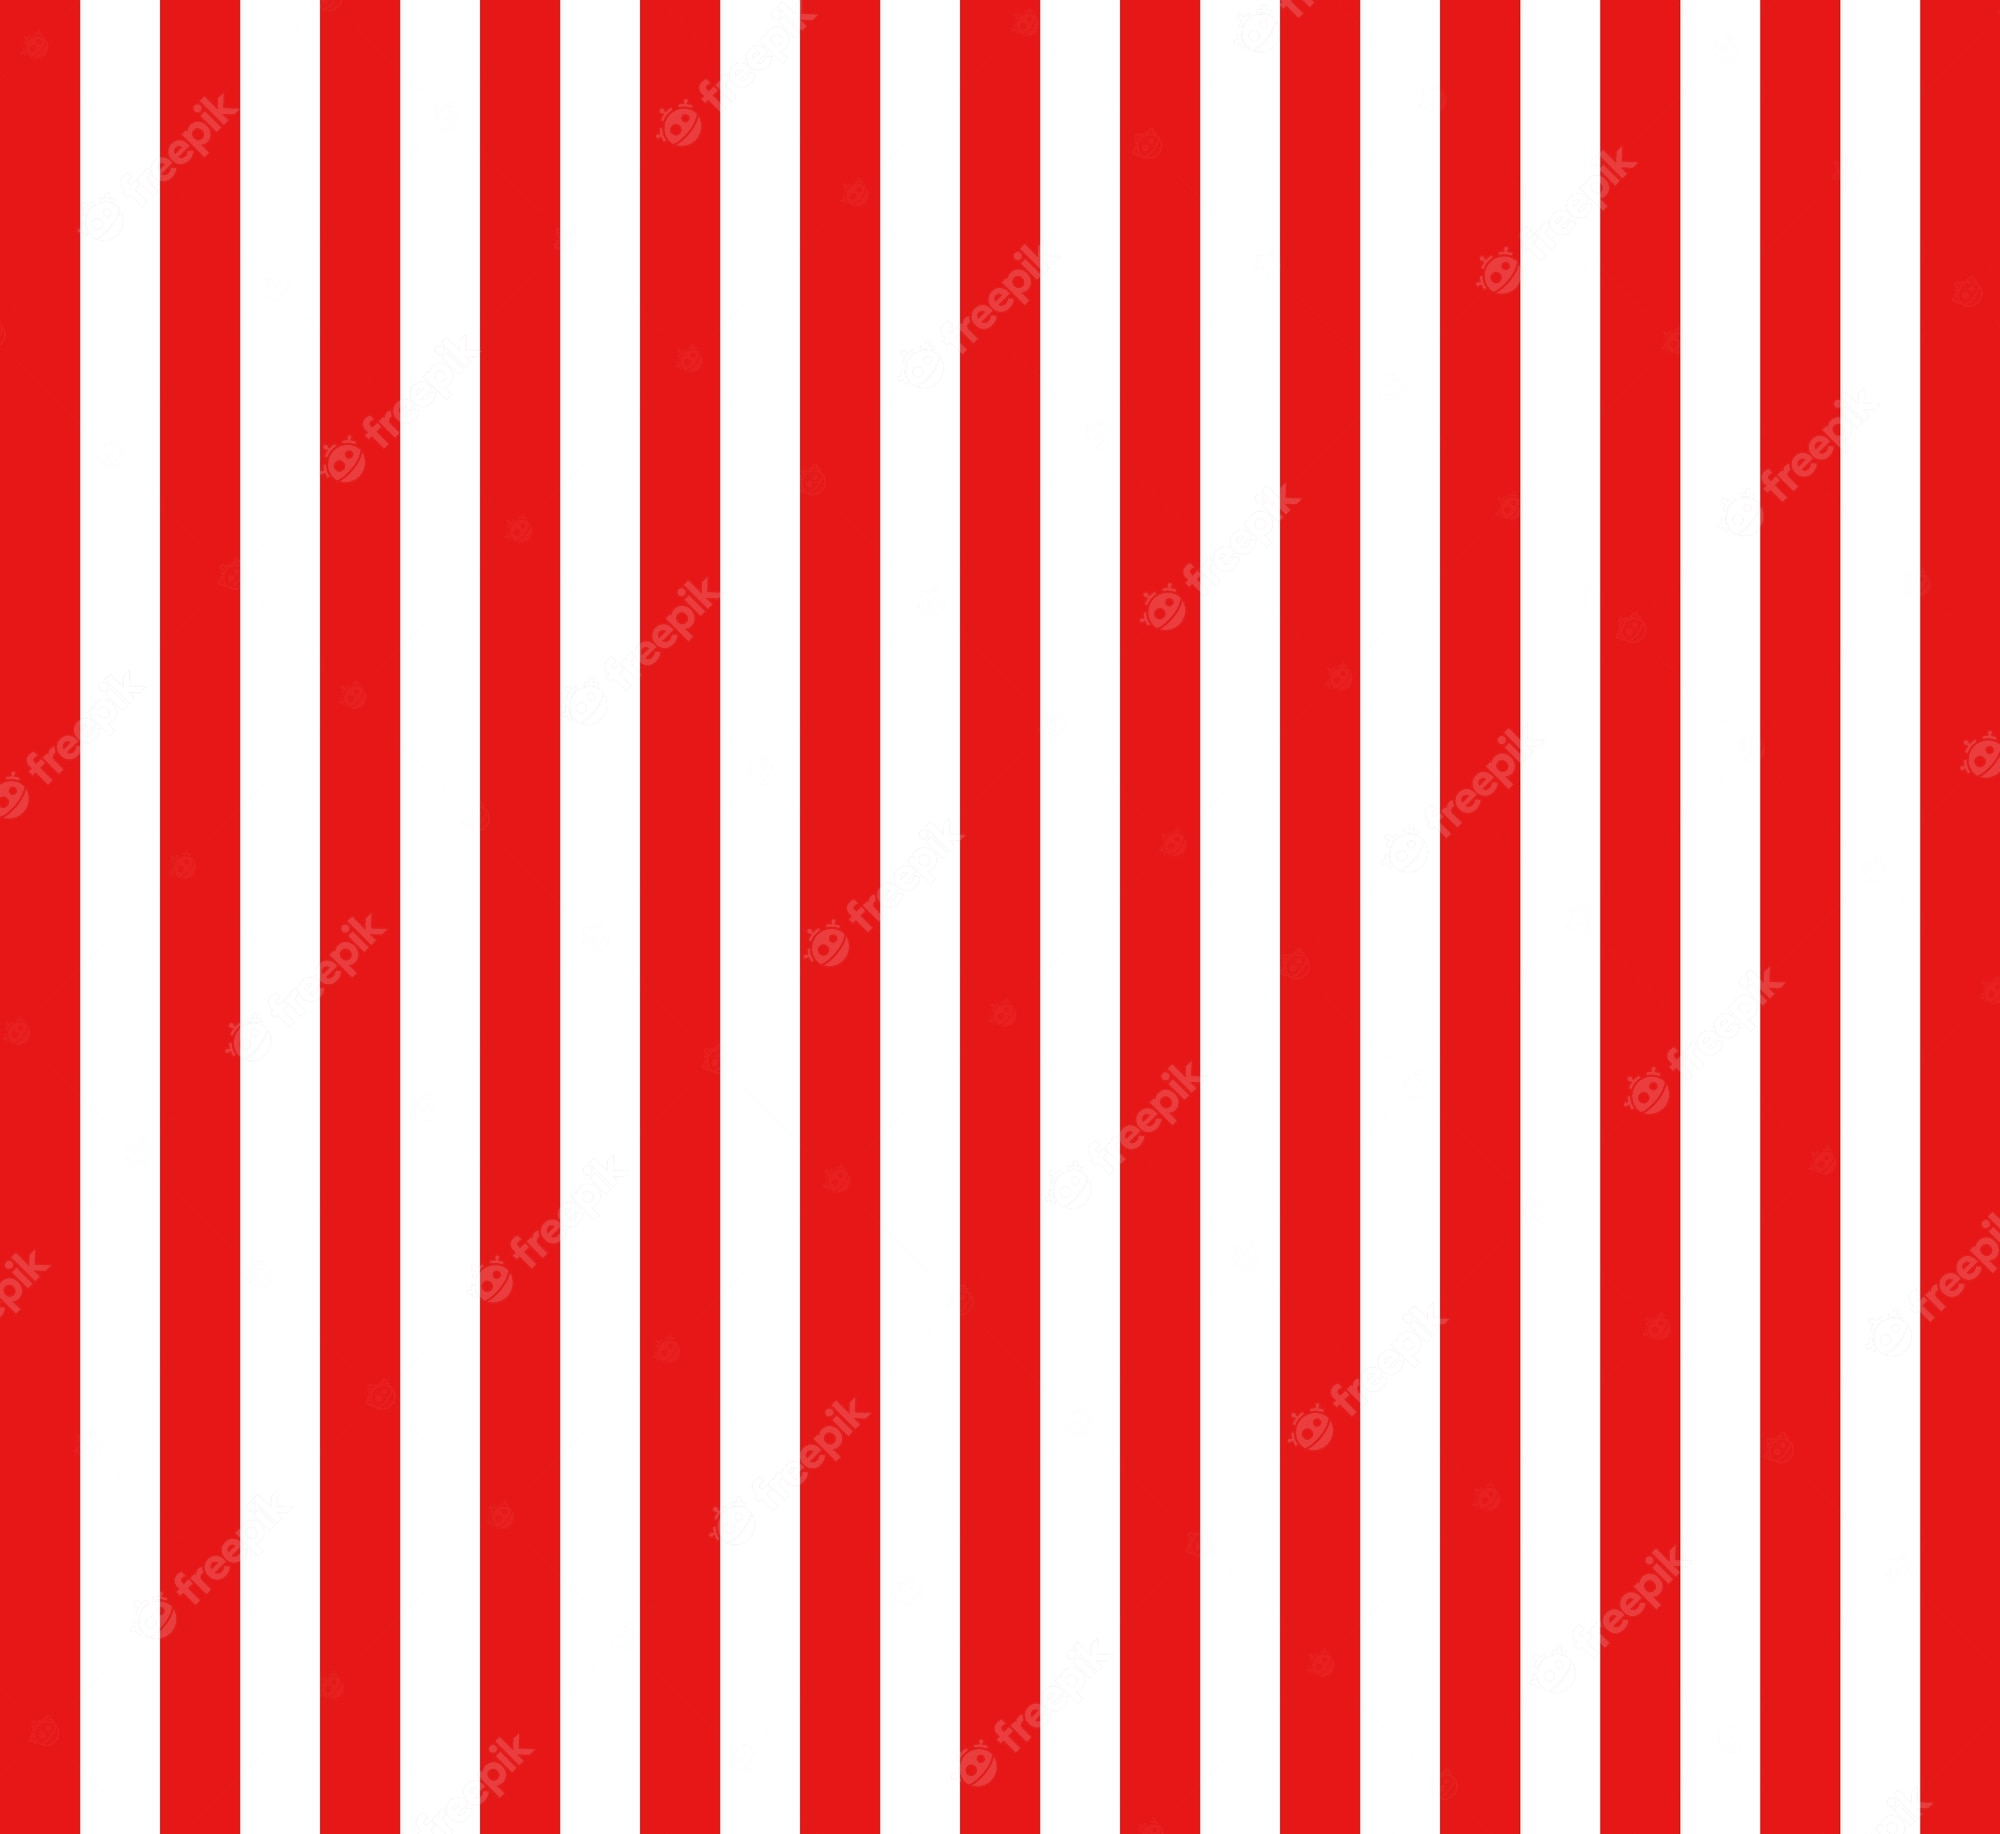 Red Stripes Image